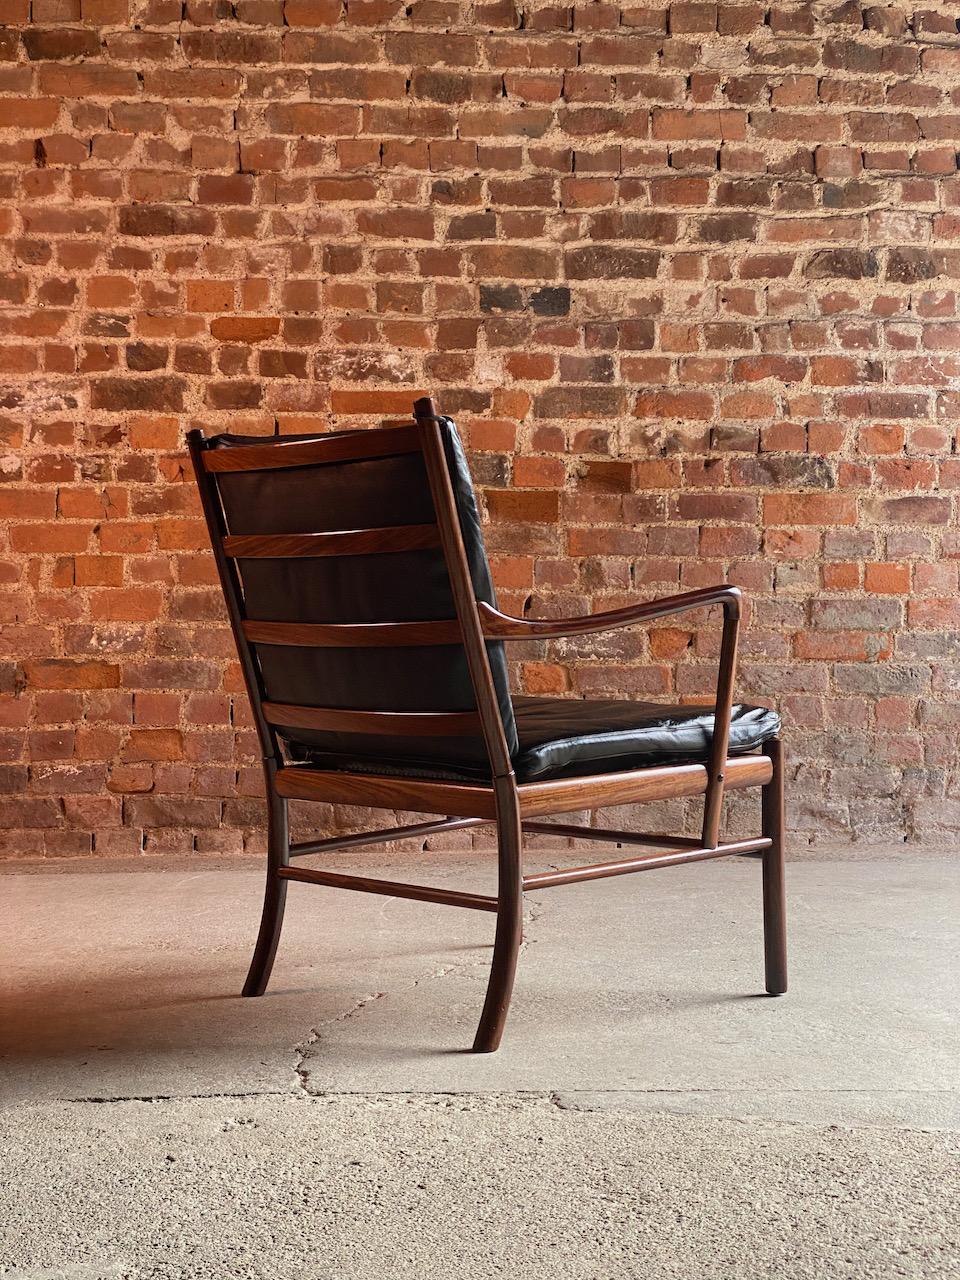 Ole Wanscher Model 149 Rosewood Colonial Chair by Poul Jeppesens, Denmark 2